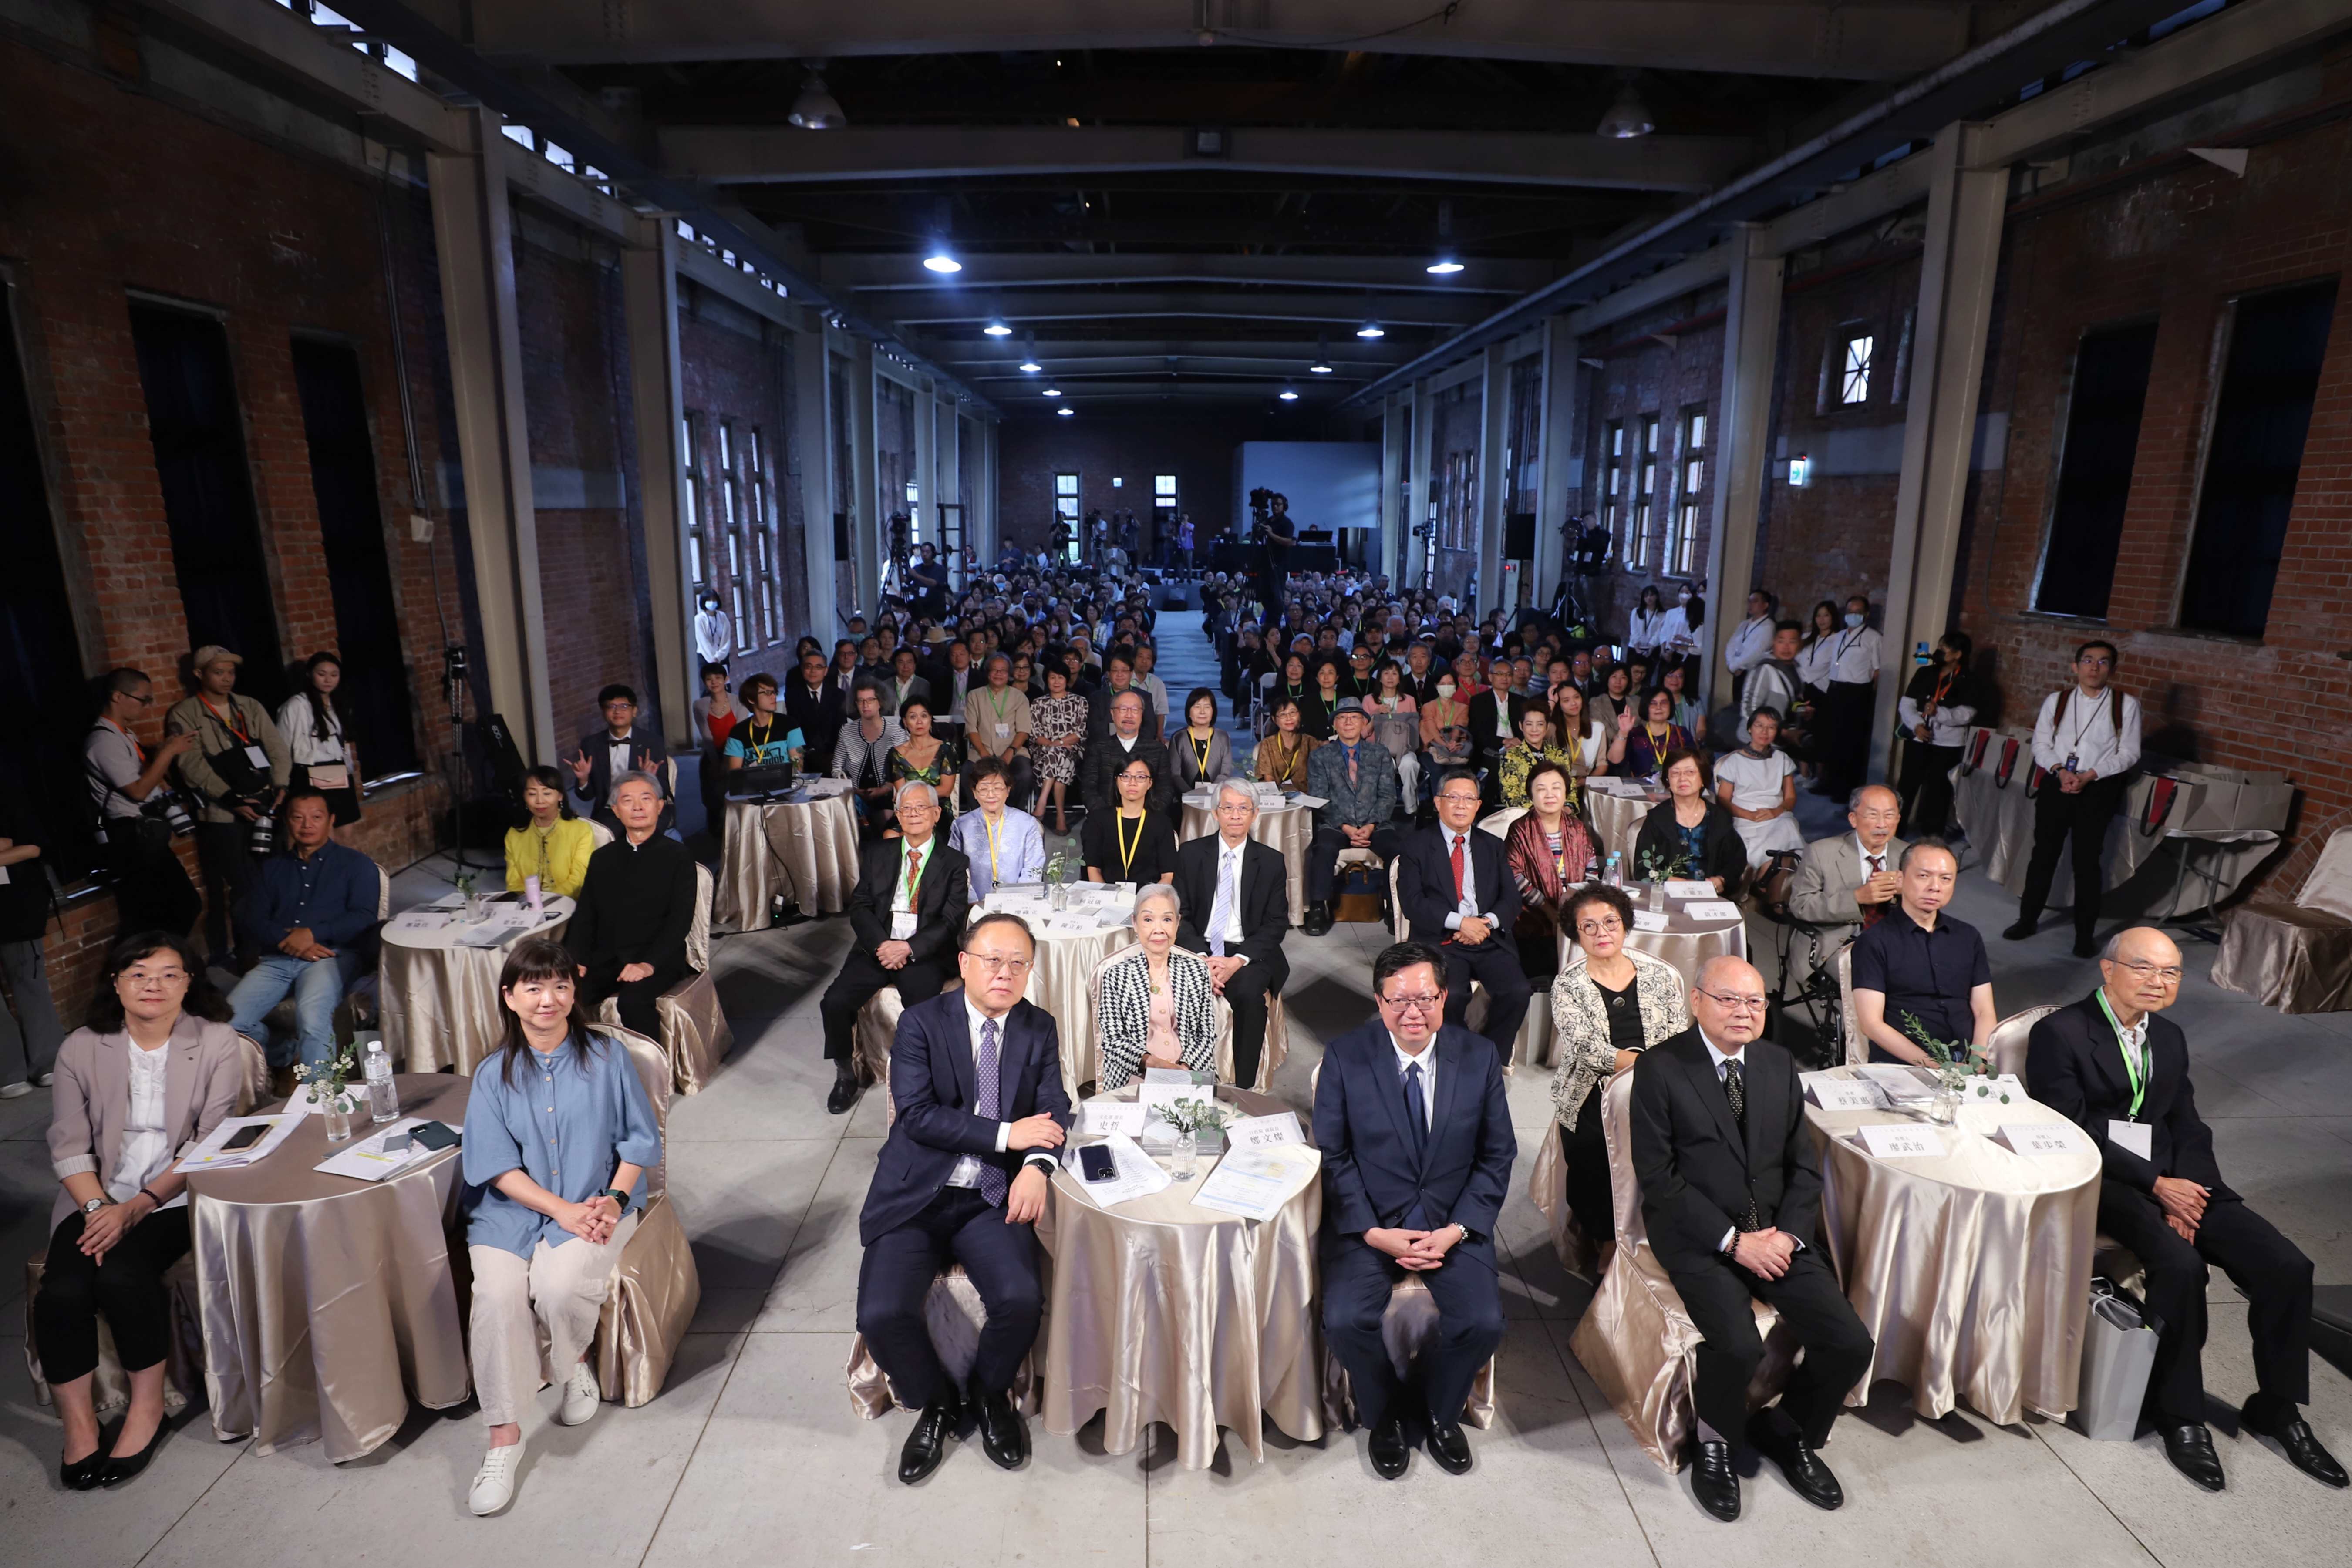 Vice Premier Cheng Wen-tsan (front row, third from right), Culture Minister Shih Che (front row, third from left) attended the the Cultural Association Medal Award ceremony with other guests